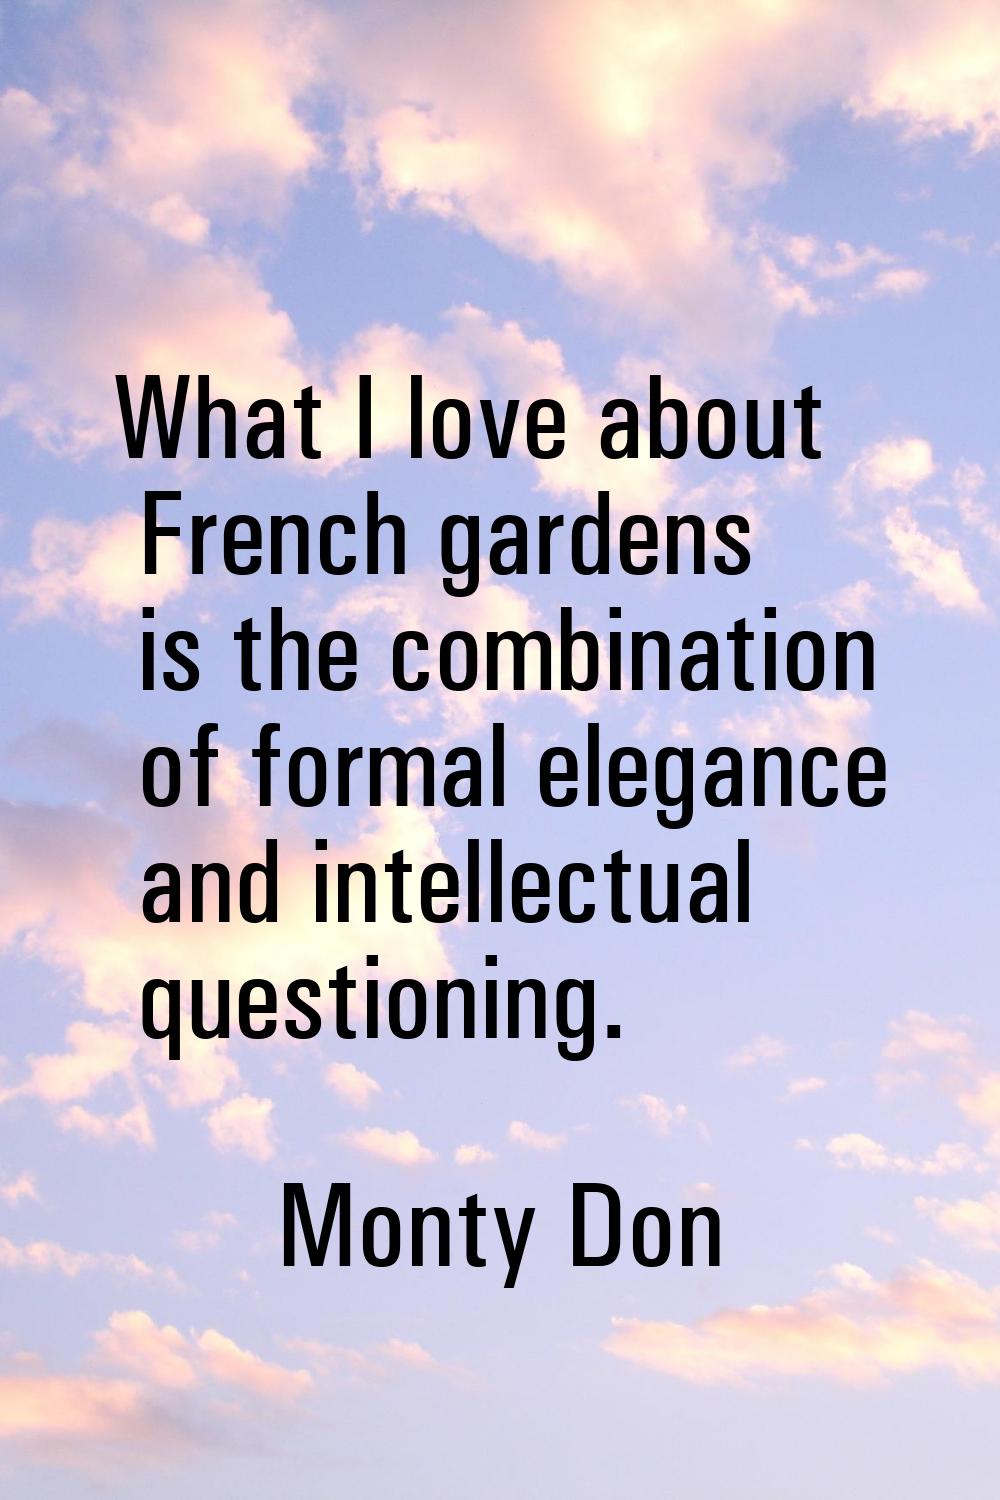 What I love about French gardens is the combination of formal elegance and intellectual questioning